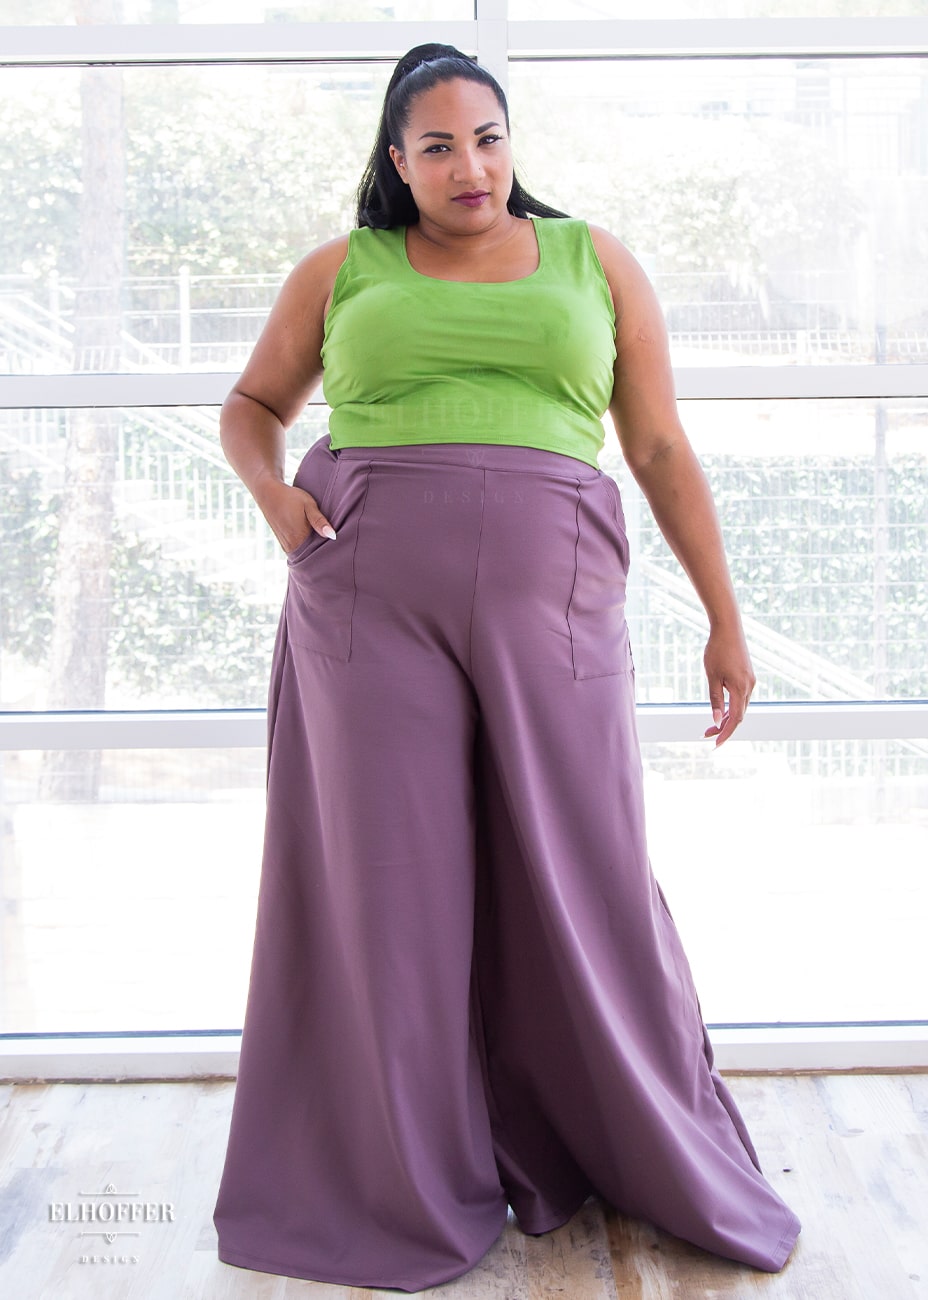 Tas, a medium skinned size 2XL model with long dark brown hair is wearing high waisted full palazzo pants with front pockets and an invisible zipper on the side seam in mauve.